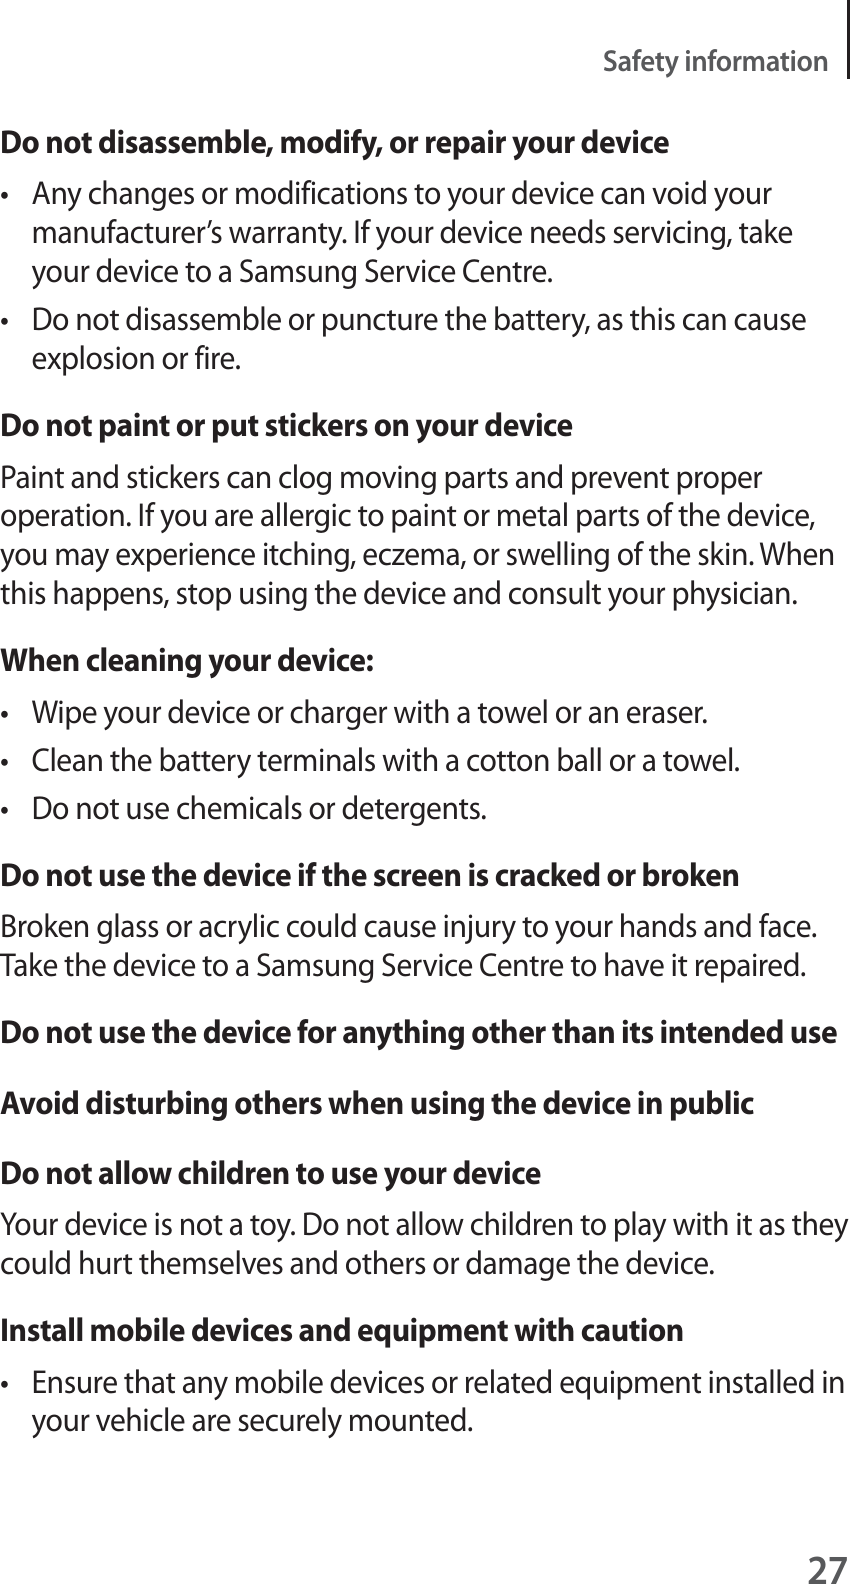 27Safety informationDo not disassemble, modify, or repair your devicet Any changes or modifications to your device can void your manufacturer’s warranty. If your device needs servicing, take your device to a Samsung Service Centre.t Do not disassemble or puncture the battery, as this can cause explosion or fire.Do not paint or put stickers on your devicePaint and stickers can clog moving parts and prevent proper operation. If you are allergic to paint or metal parts of the device, you may experience itching, eczema, or swelling of the skin. When this happens, stop using the device and consult your physician.When cleaning your device:t Wipe your device or charger with a towel or an eraser.t Clean the battery terminals with a cotton ball or a towel.t Do not use chemicals or detergents.Do not use the device if the screen is cracked or brokenBroken glass or acrylic could cause injury to your hands and face. Take the device to a Samsung Service Centre to have it repaired.Do not use the device for anything other than its intended useAvoid disturbing others when using the device in publicDo not allow children to use your deviceYour device is not a toy. Do not allow children to play with it as they could hurt themselves and others or damage the device.Install mobile devices and equipment with cautiont Ensure that any mobile devices or related equipment installed in your vehicle are securely mounted.